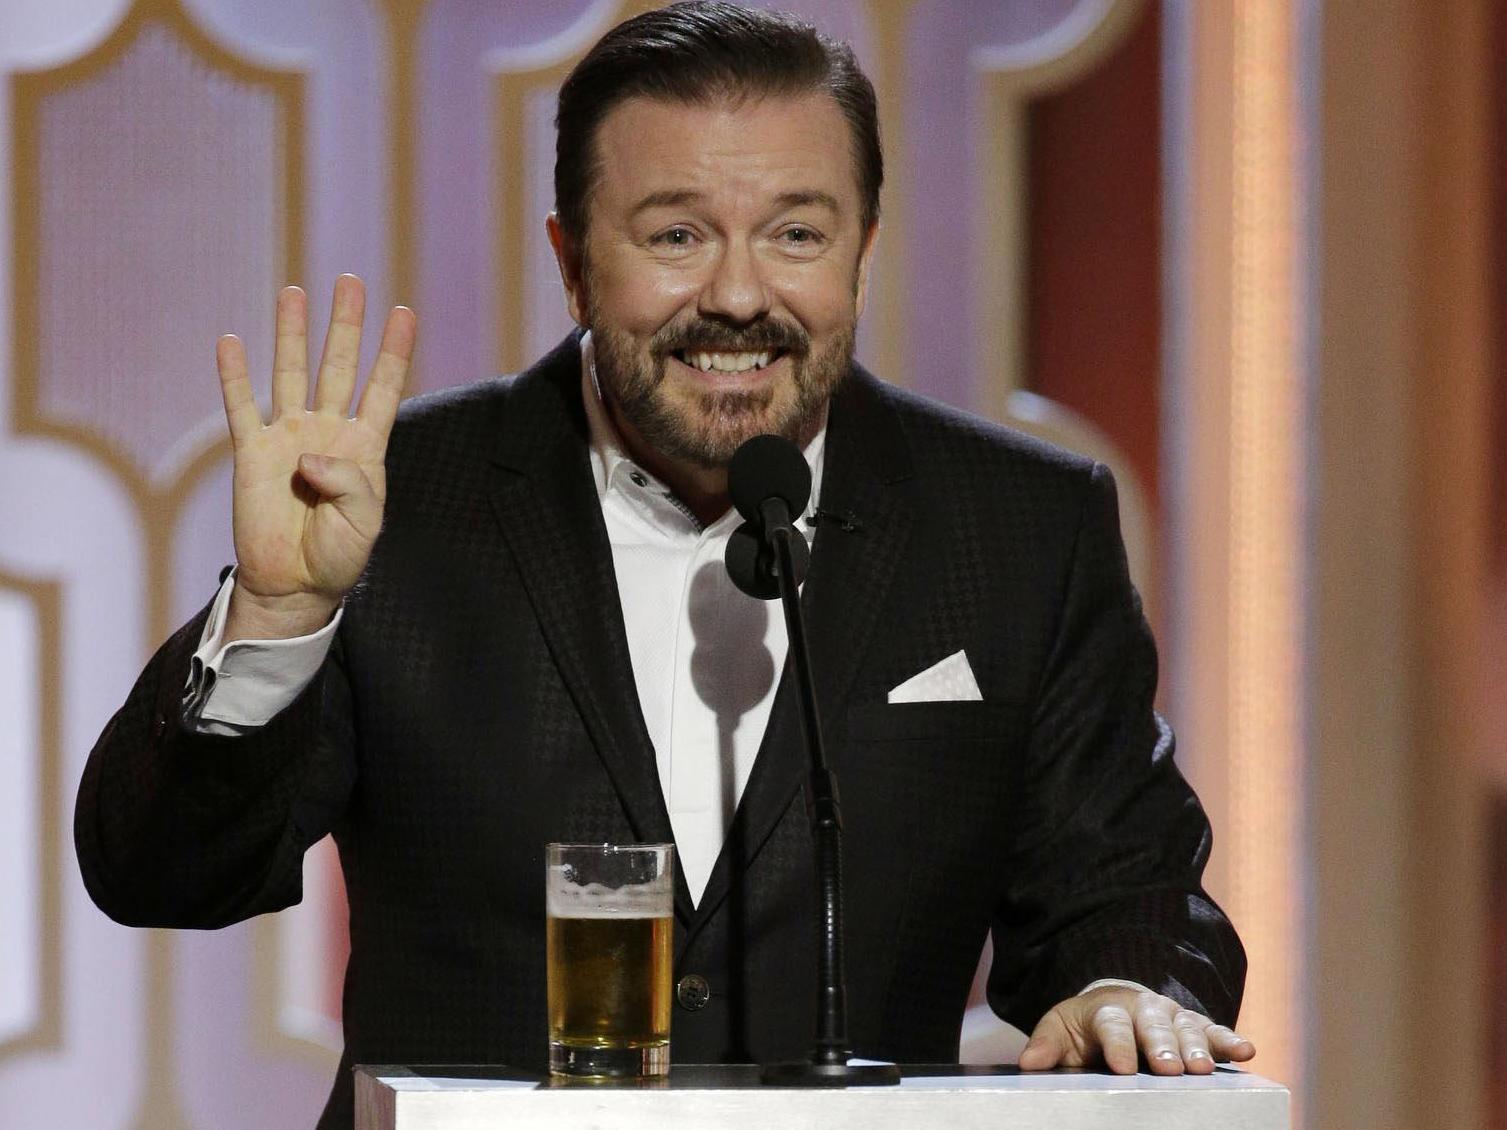 Ricky Gervais at the 73rd Golden Globes